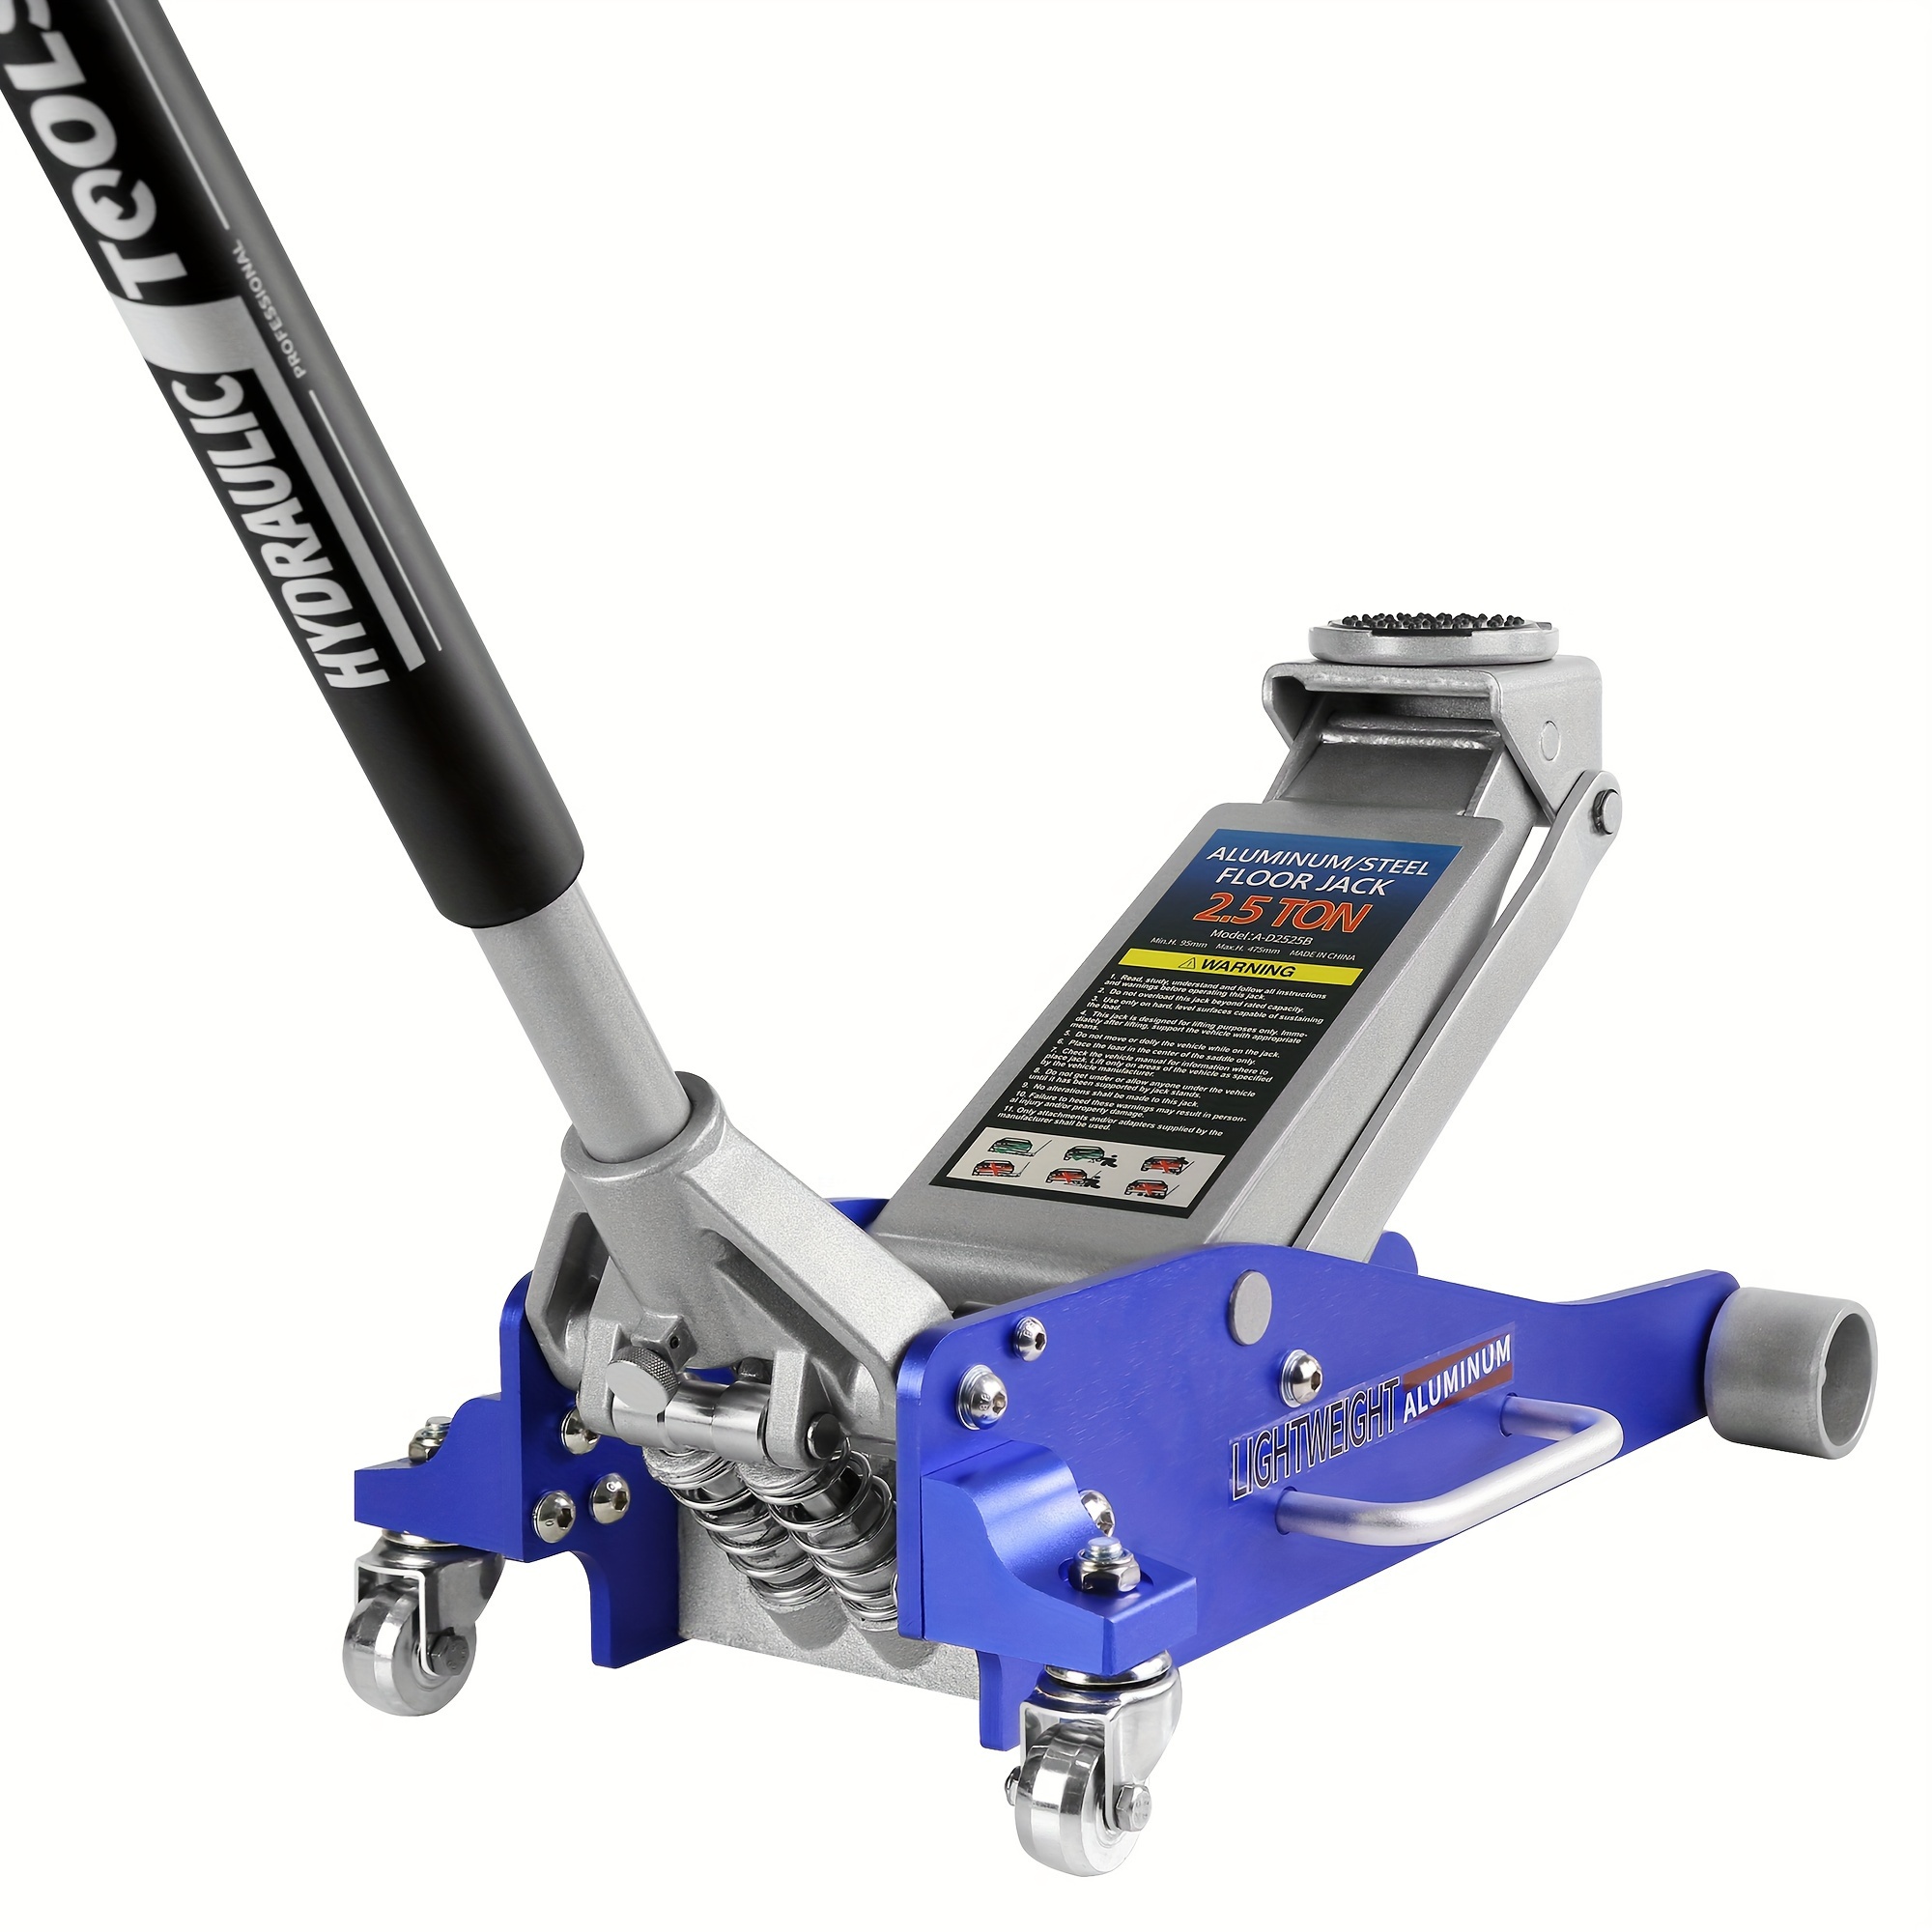 

Hydraulic Low Profile Aluminum And Steel Racing Floor Jack With Dual Piston Quick Lift Pump, 2.5 Ton (5, 000 Lb) Capacity